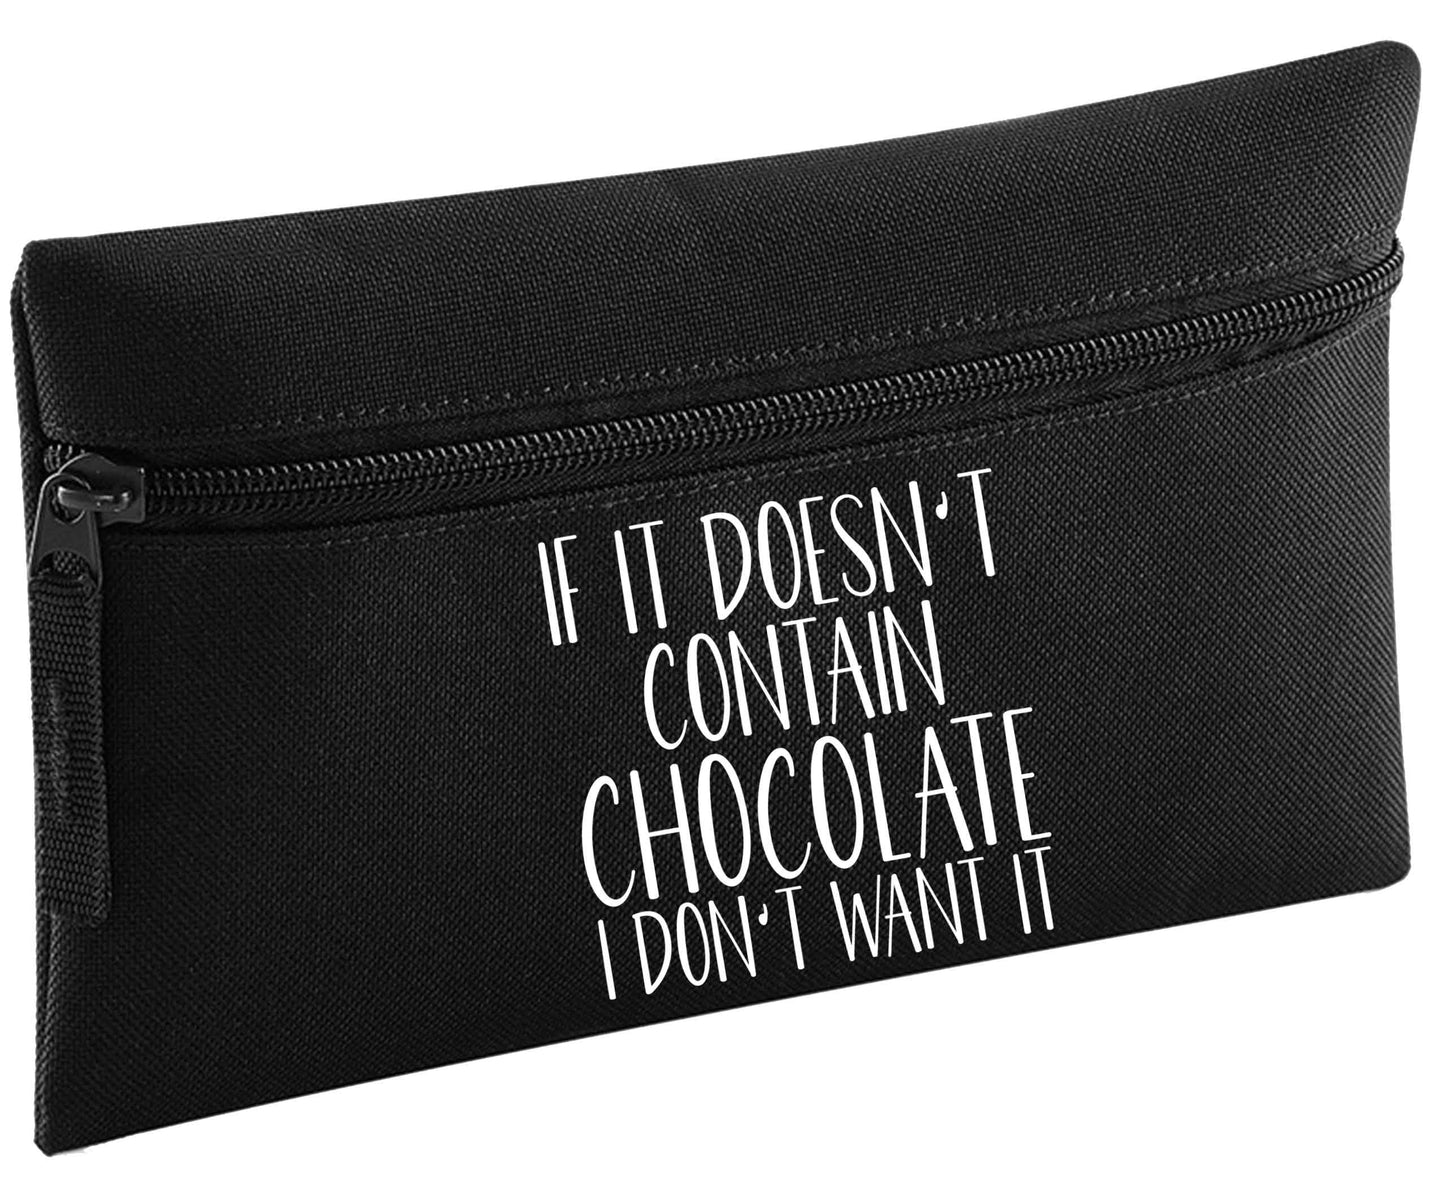 If it doesn't contain chocolate I don't want it pencil case